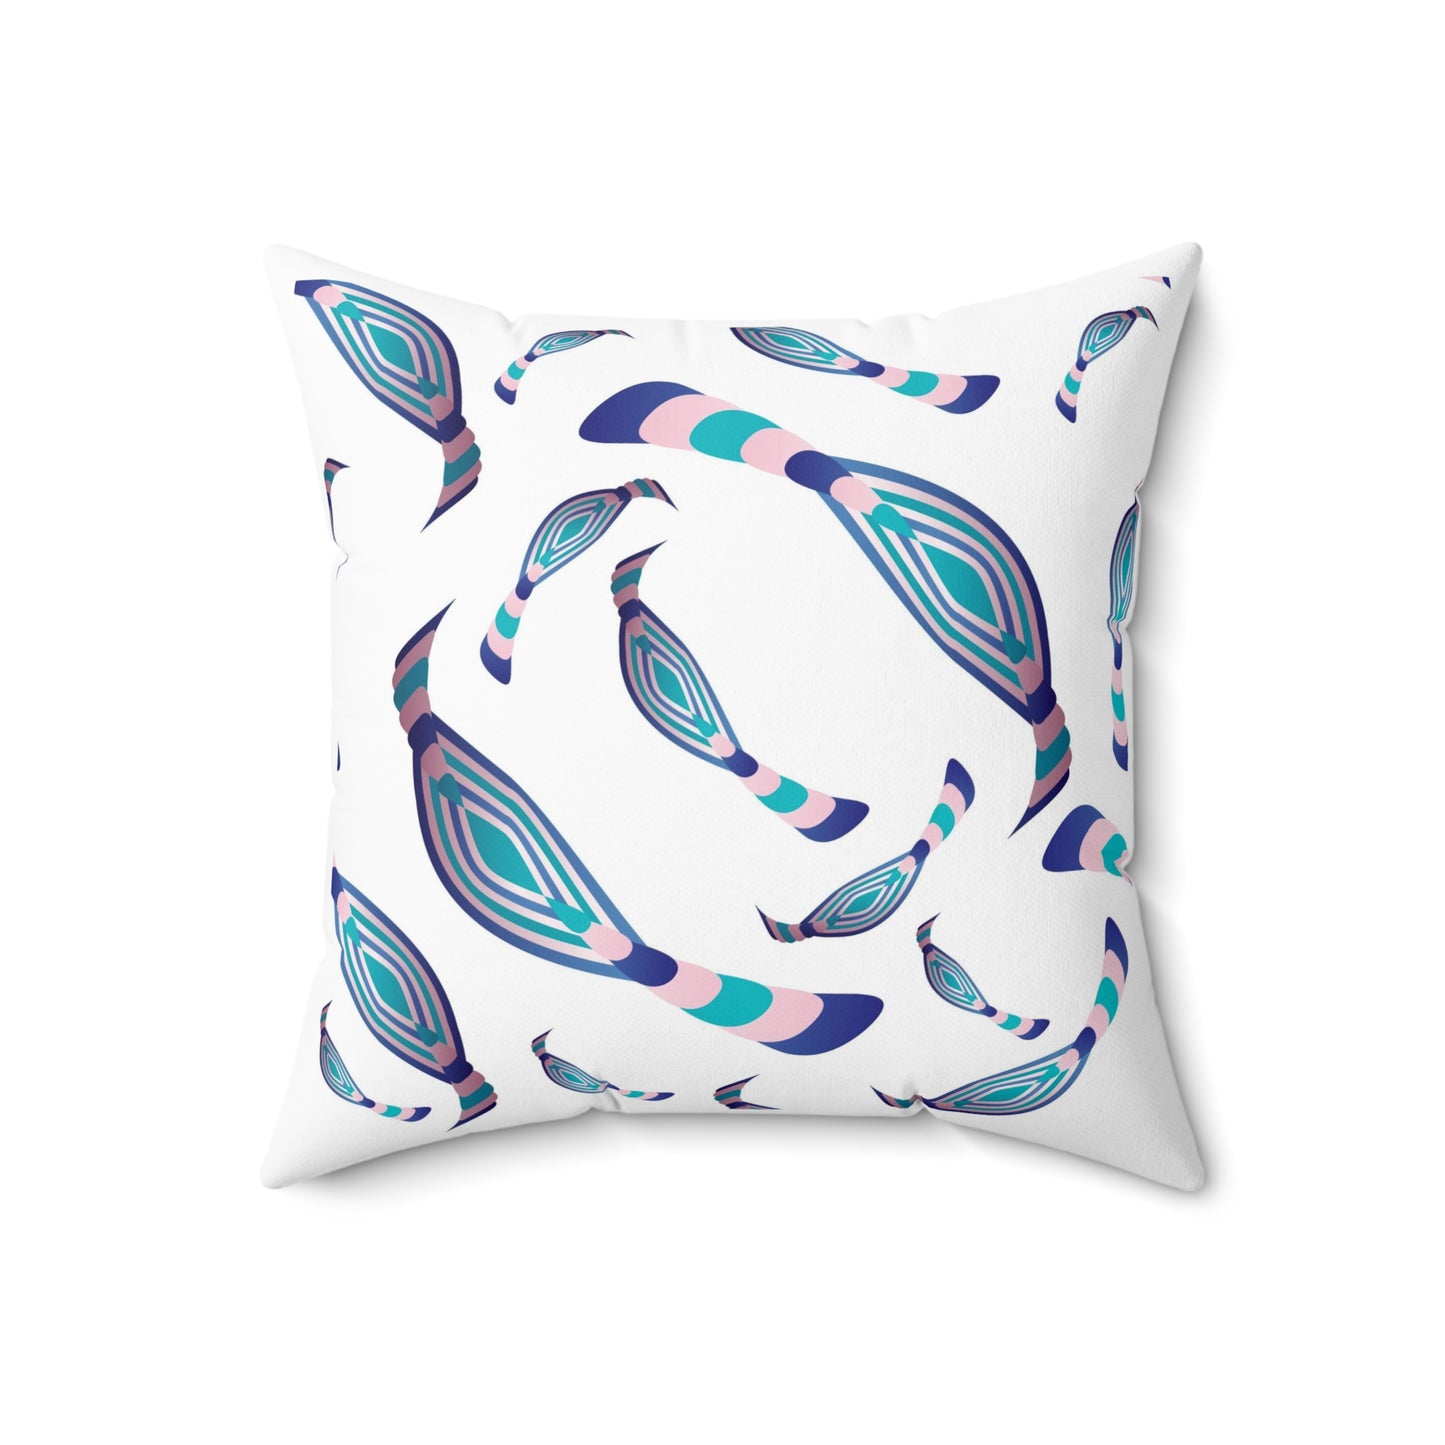 Spun Polyester Square Pillow Kukloso Abstractical No 21 - Free Shipping